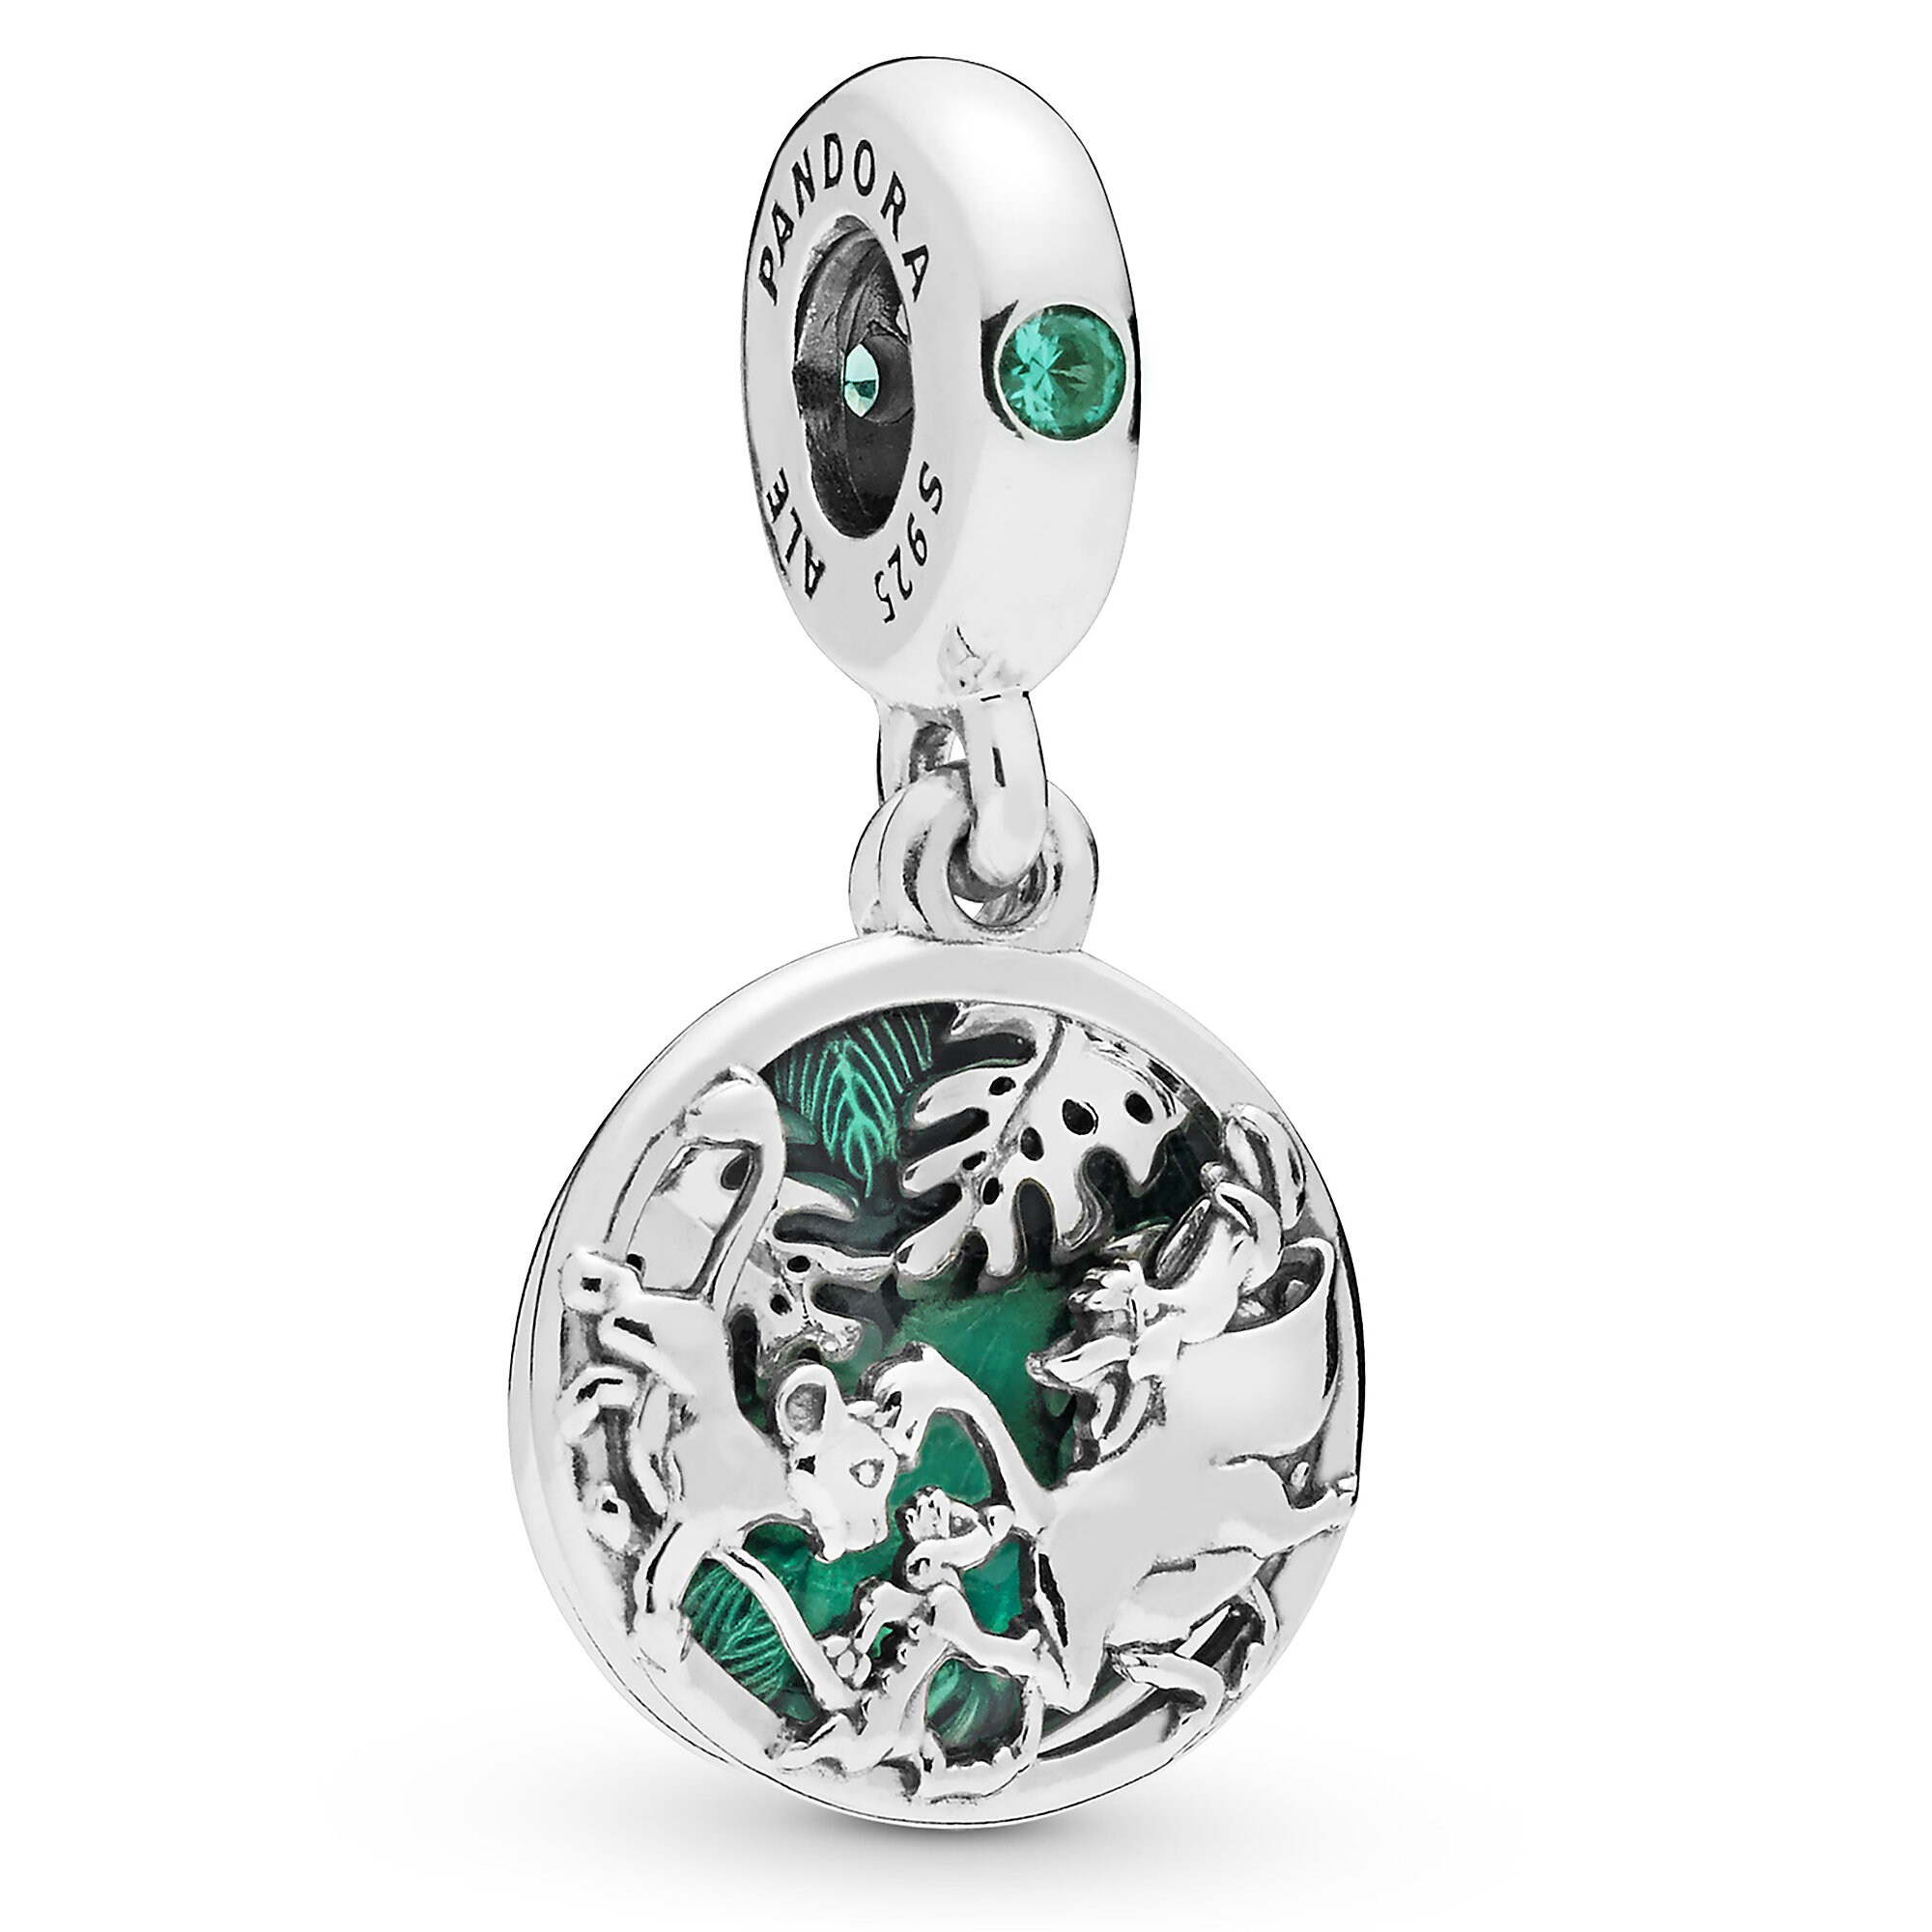 Timon and Pumbaa Charm by Pandora Jewelry - The Lion King